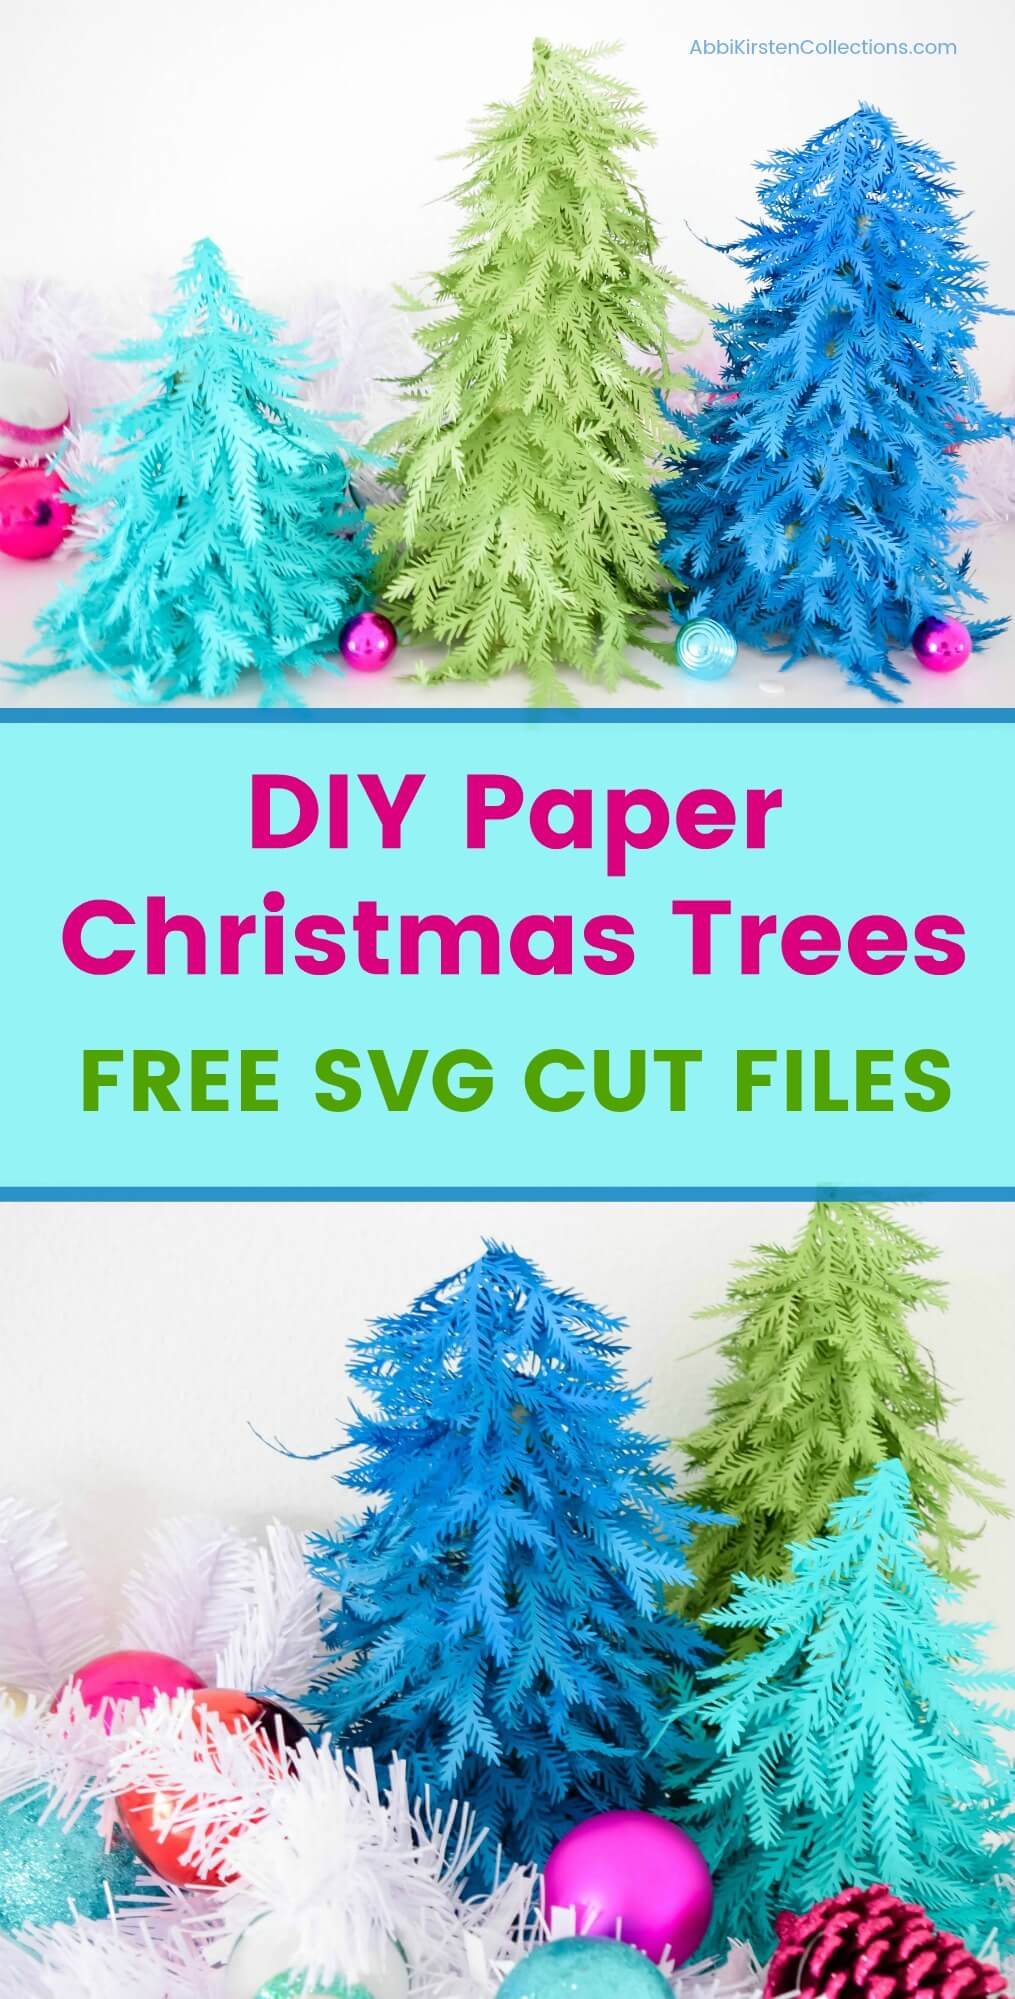 A collage of two stacked images show colorful paper Christmas trees made with teal, blue, and green paper. Text in the center of the image says "DIY Paper Christmas Trees, Free SVG cut files"